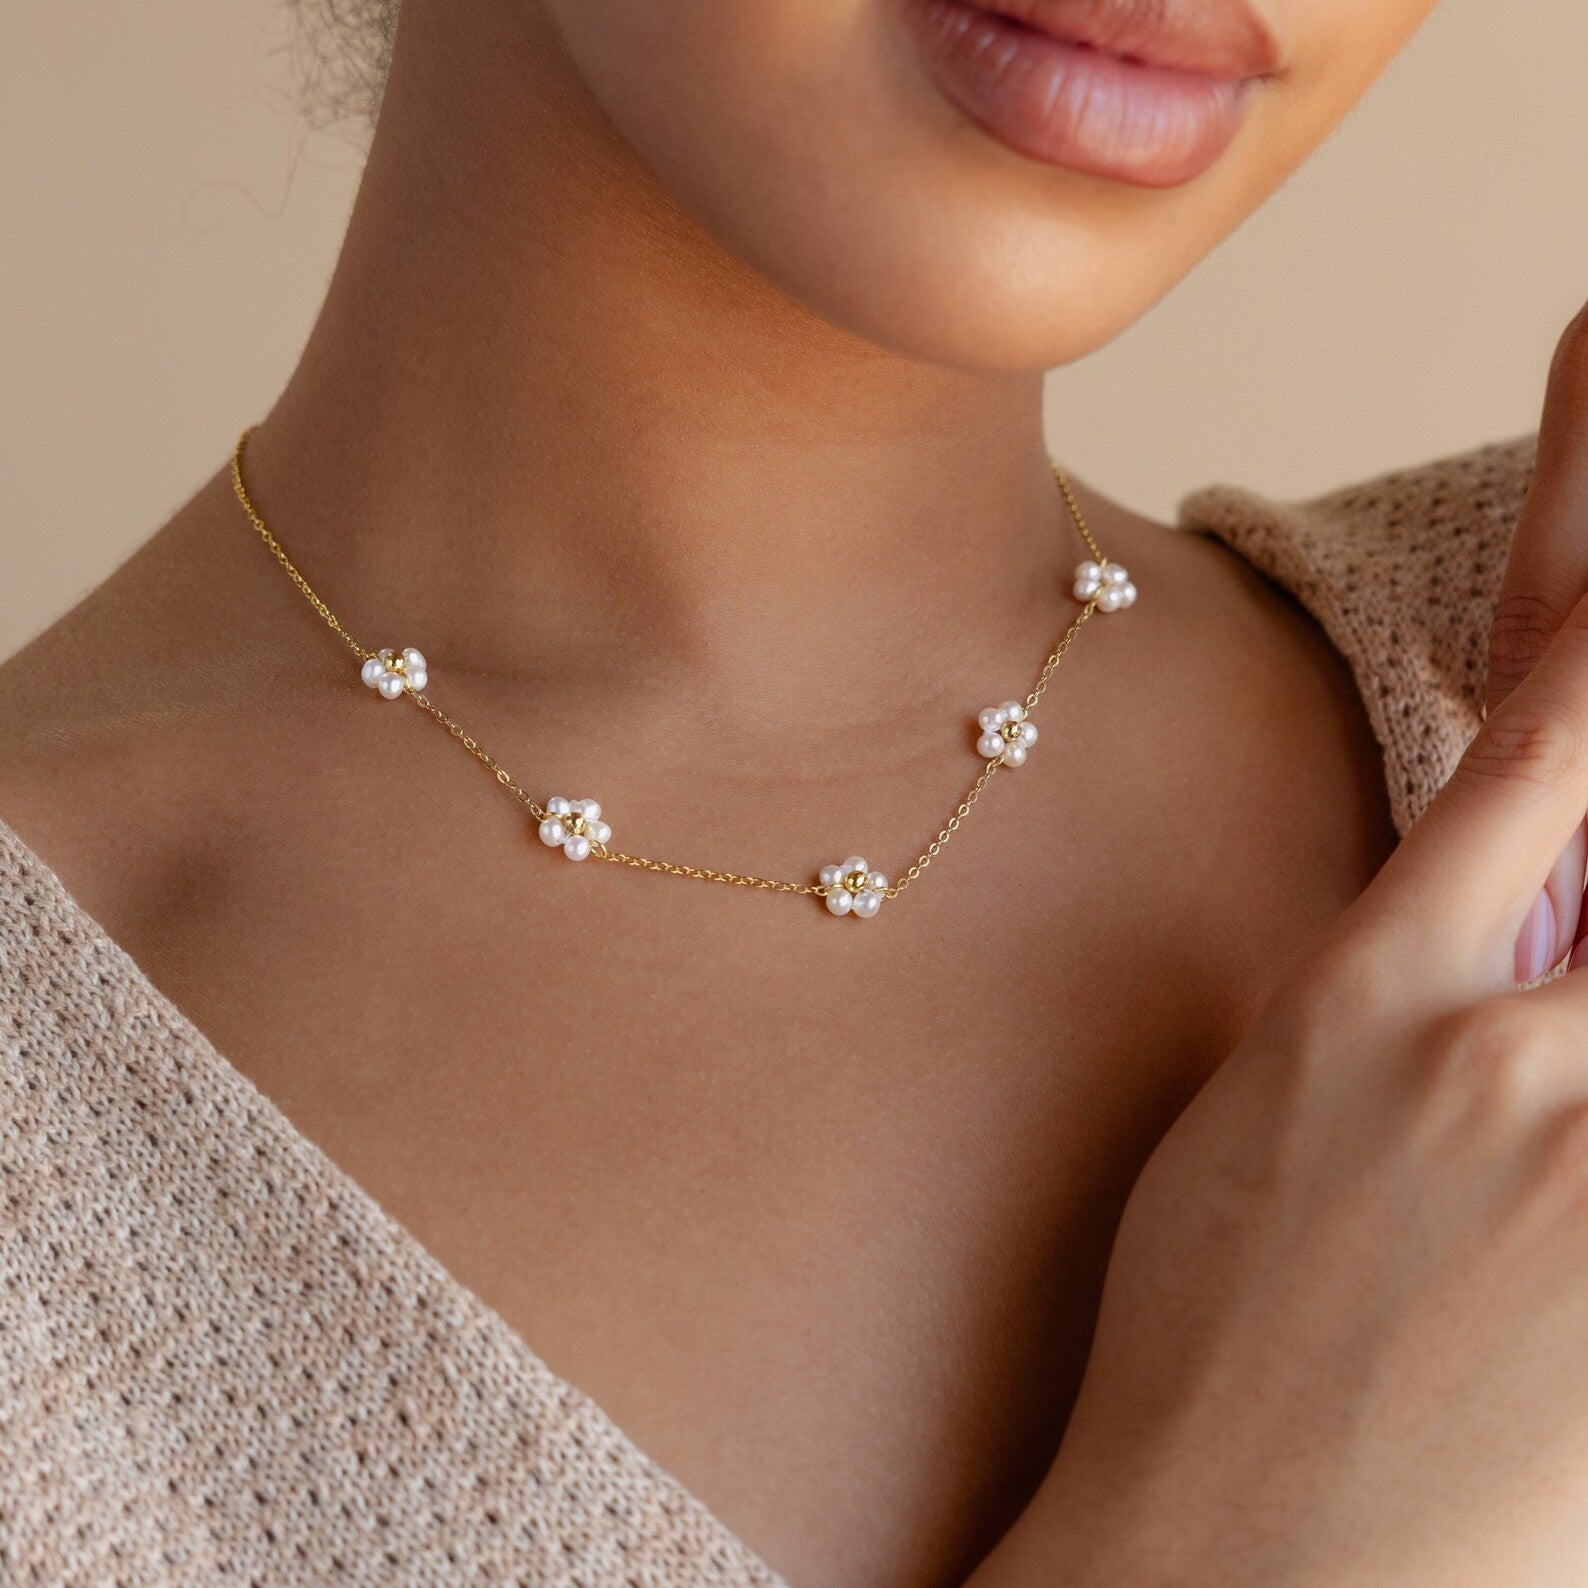 Velvet Rosette Choker Necklace | Urban Outfitters Mexico - Clothing, Music,  Home & Accessories